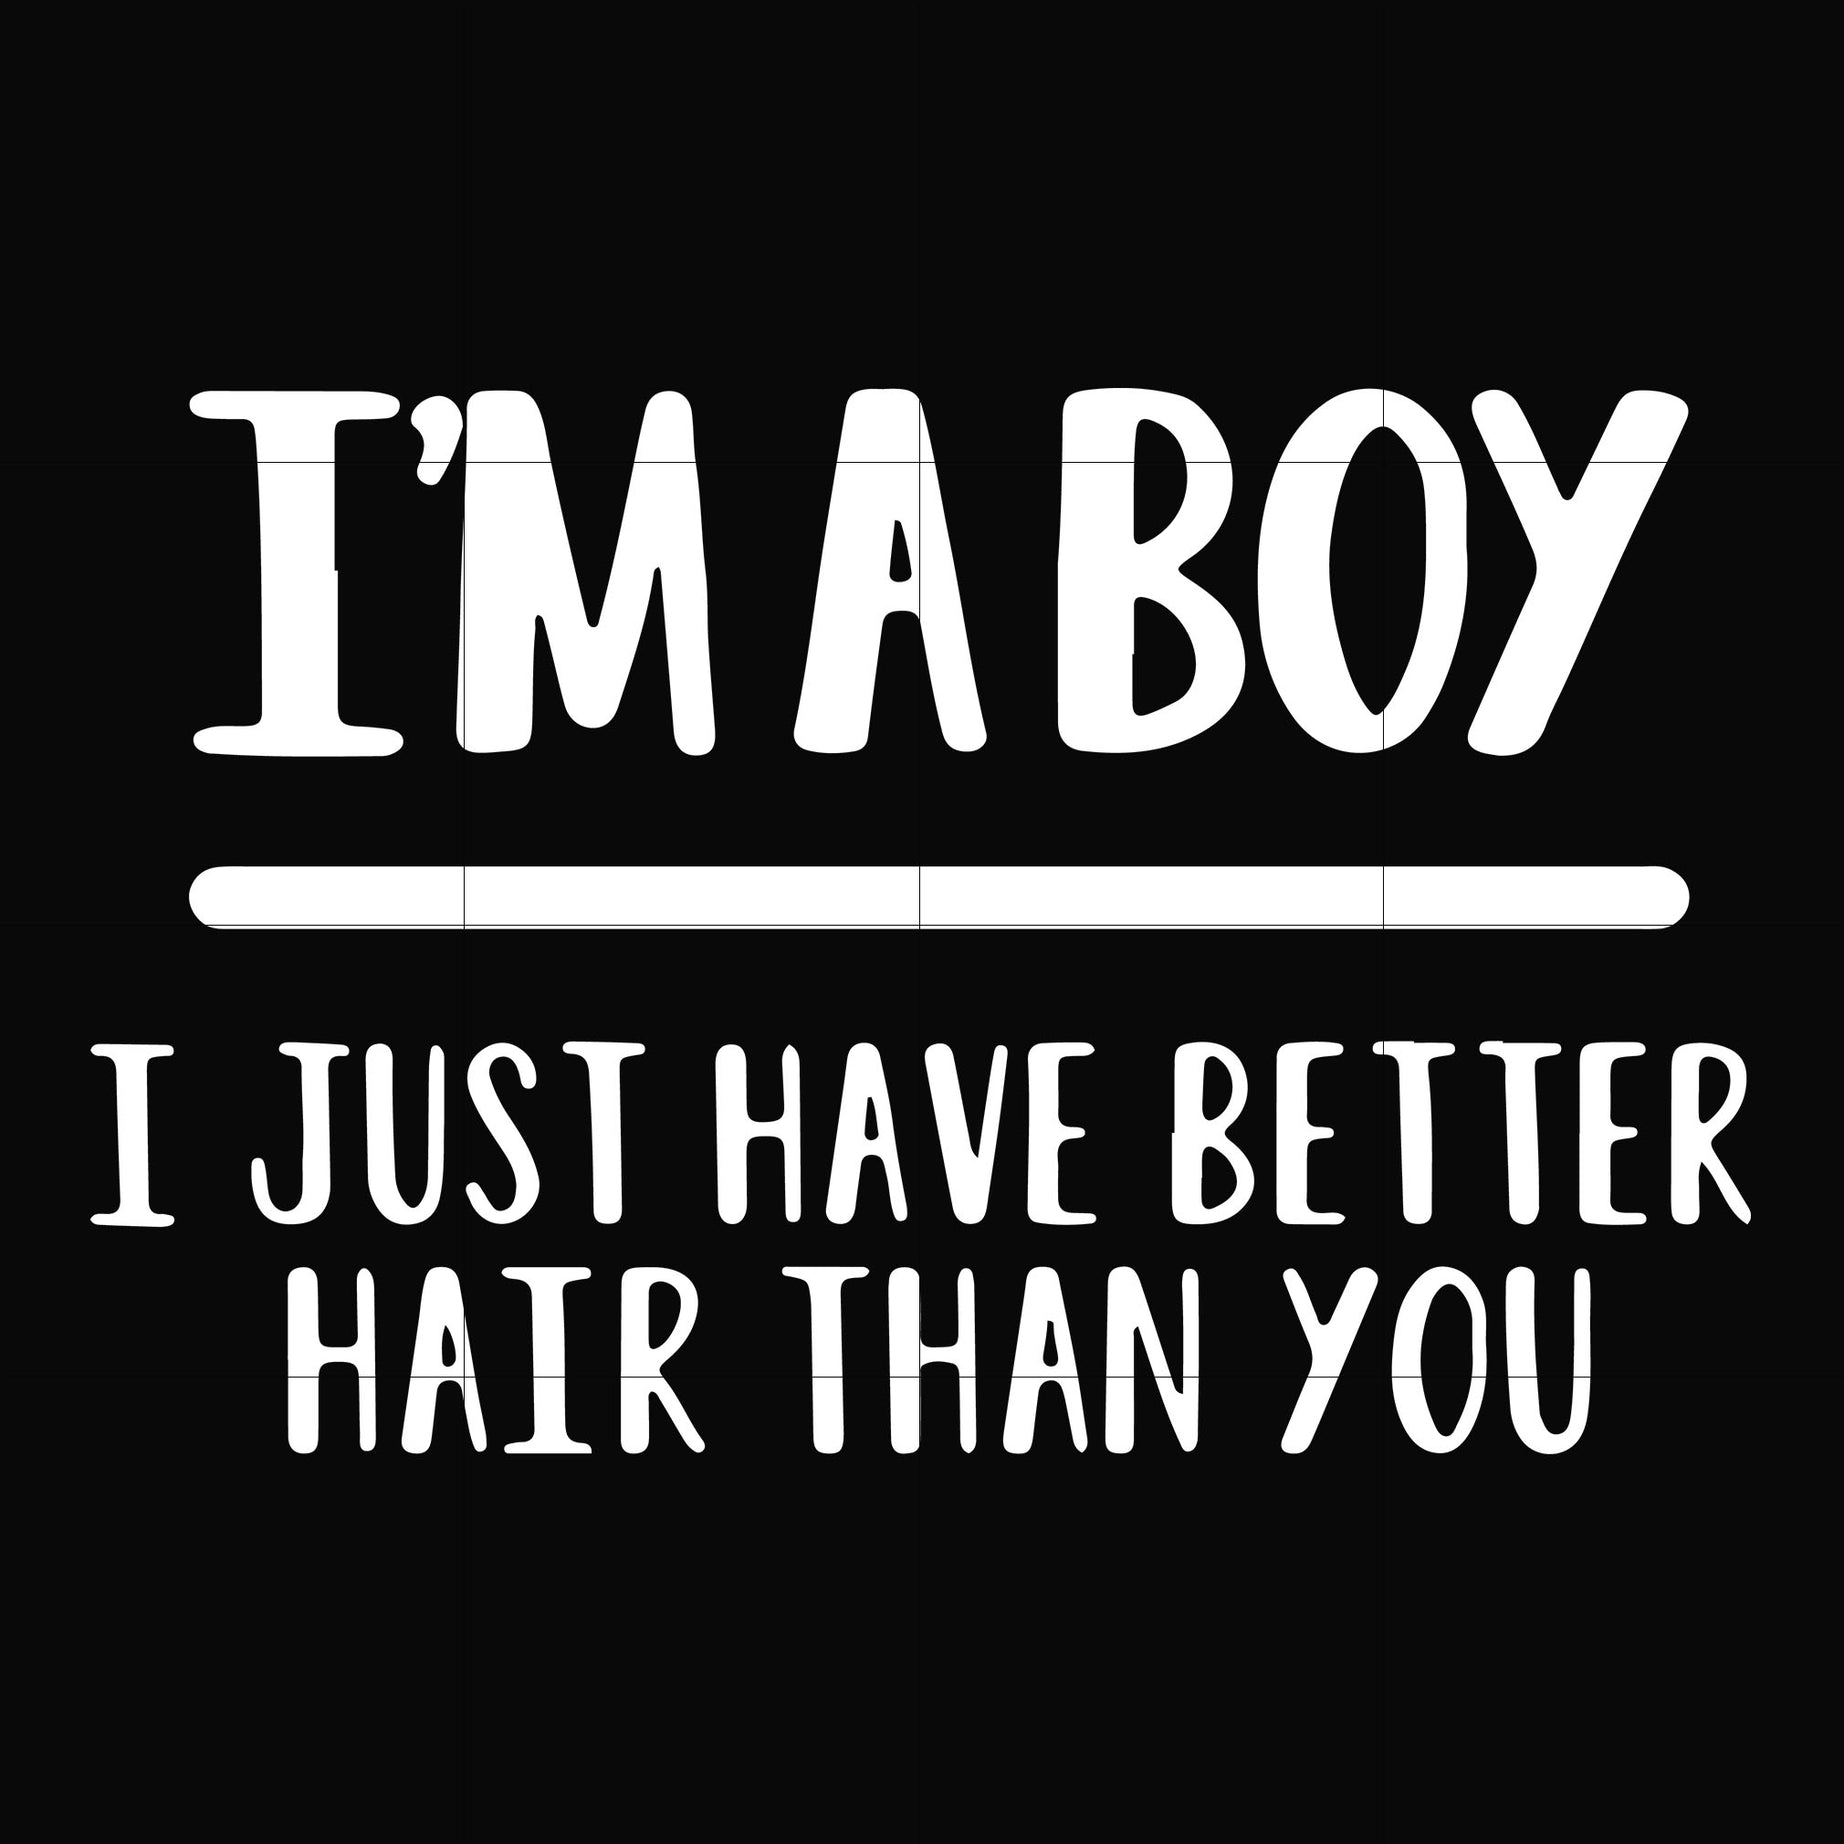 I'm a boy I just have better hair than you svg, png, dxf, eps file FN000394